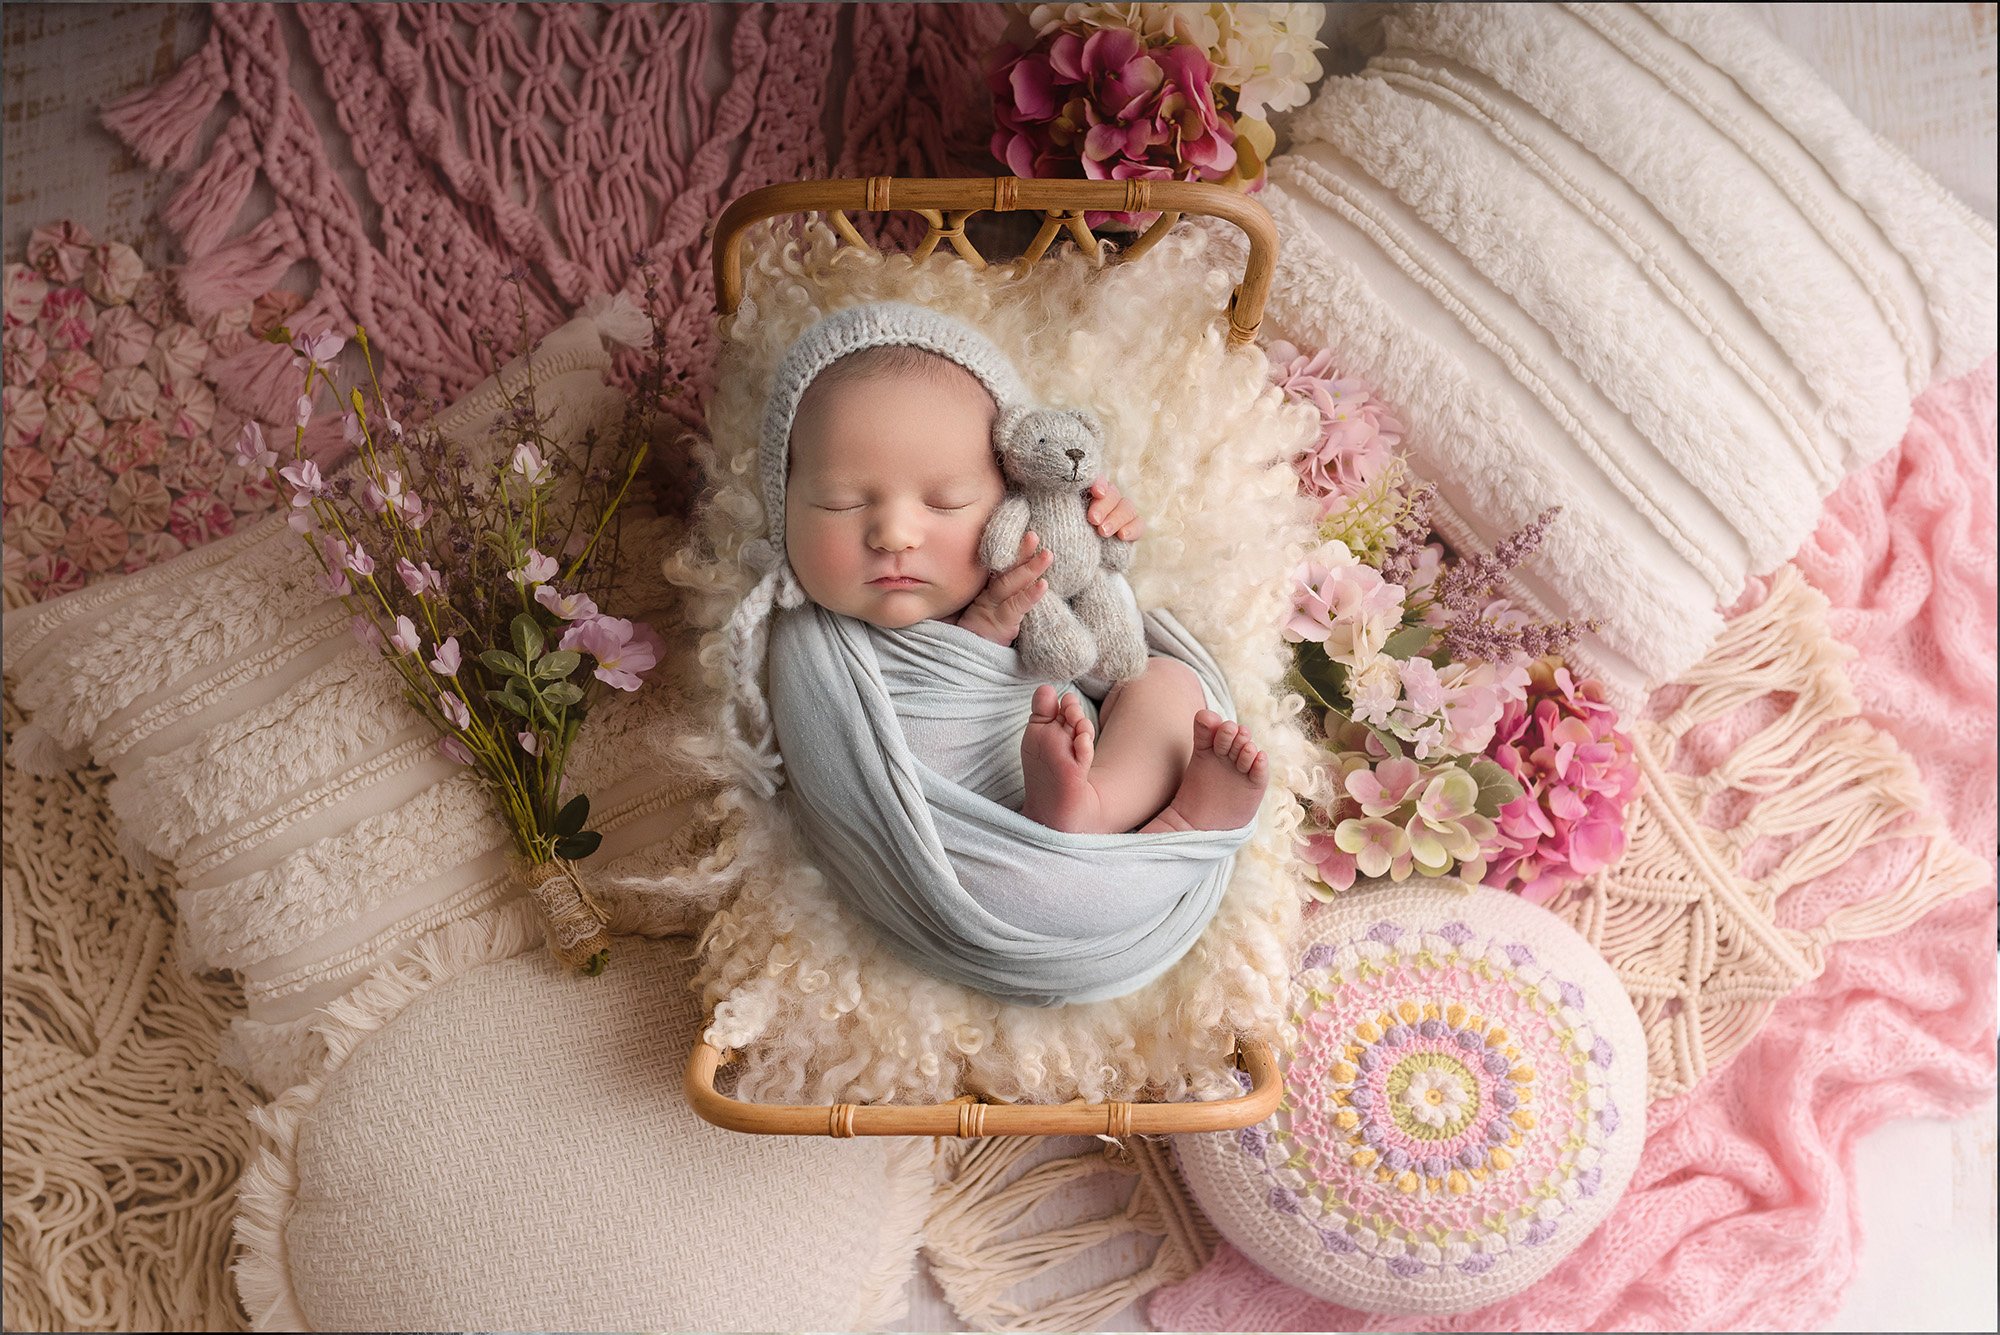 wrapped newborn photos newborn baby girl sound asleep in grey bonnet on miniature rattan bed surrounded by soft pillows and macrame in white and pink